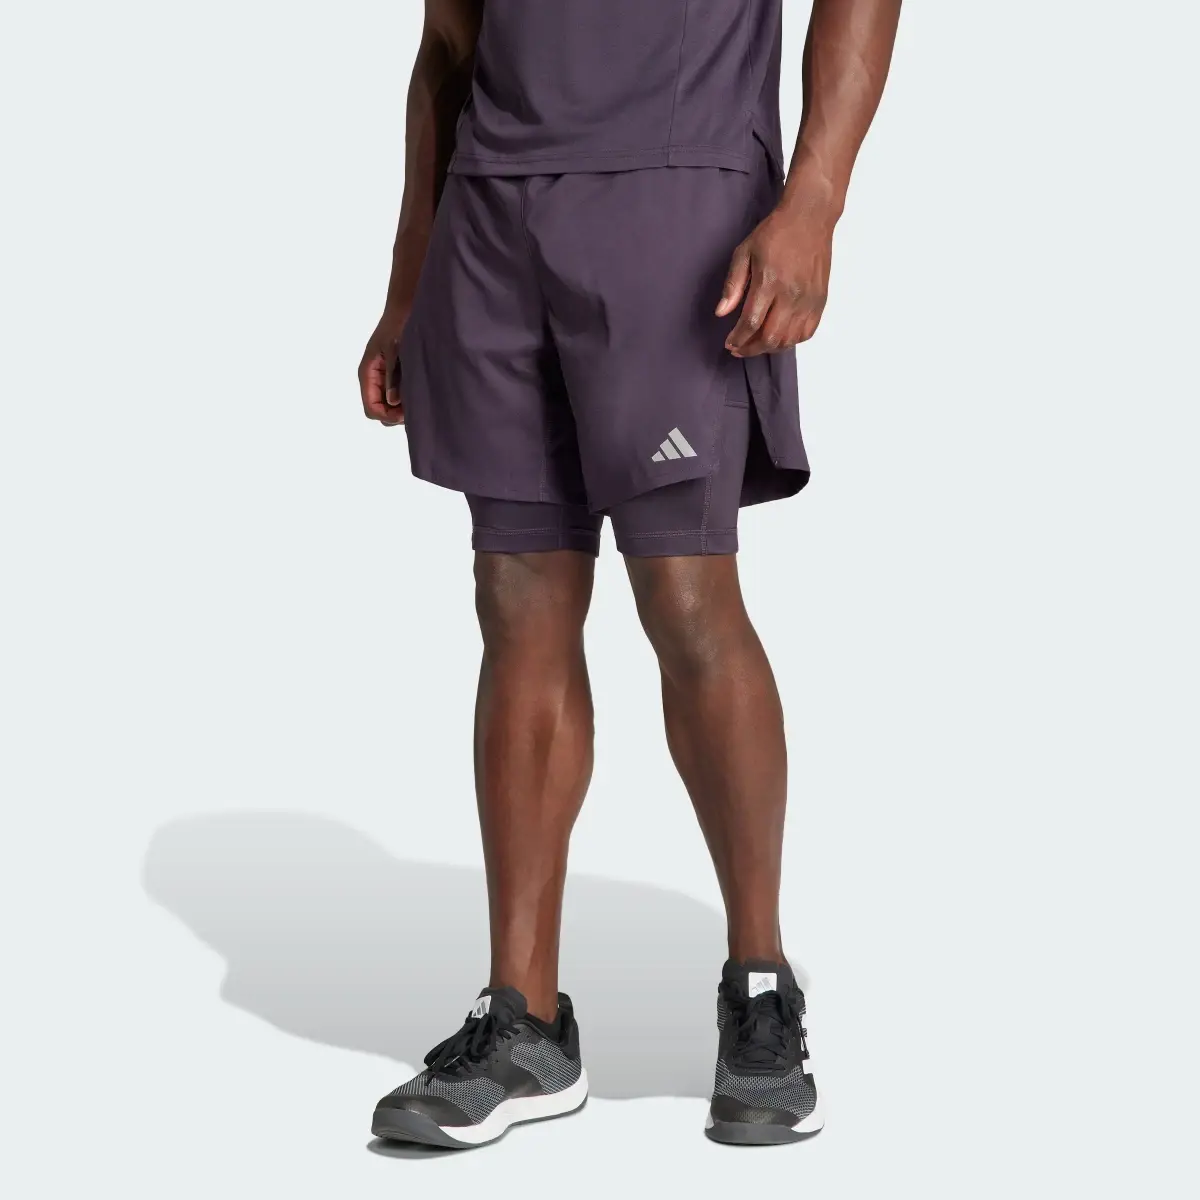 Adidas HIIT Workout HEAT.RDY 2-in-1 Shorts. 1